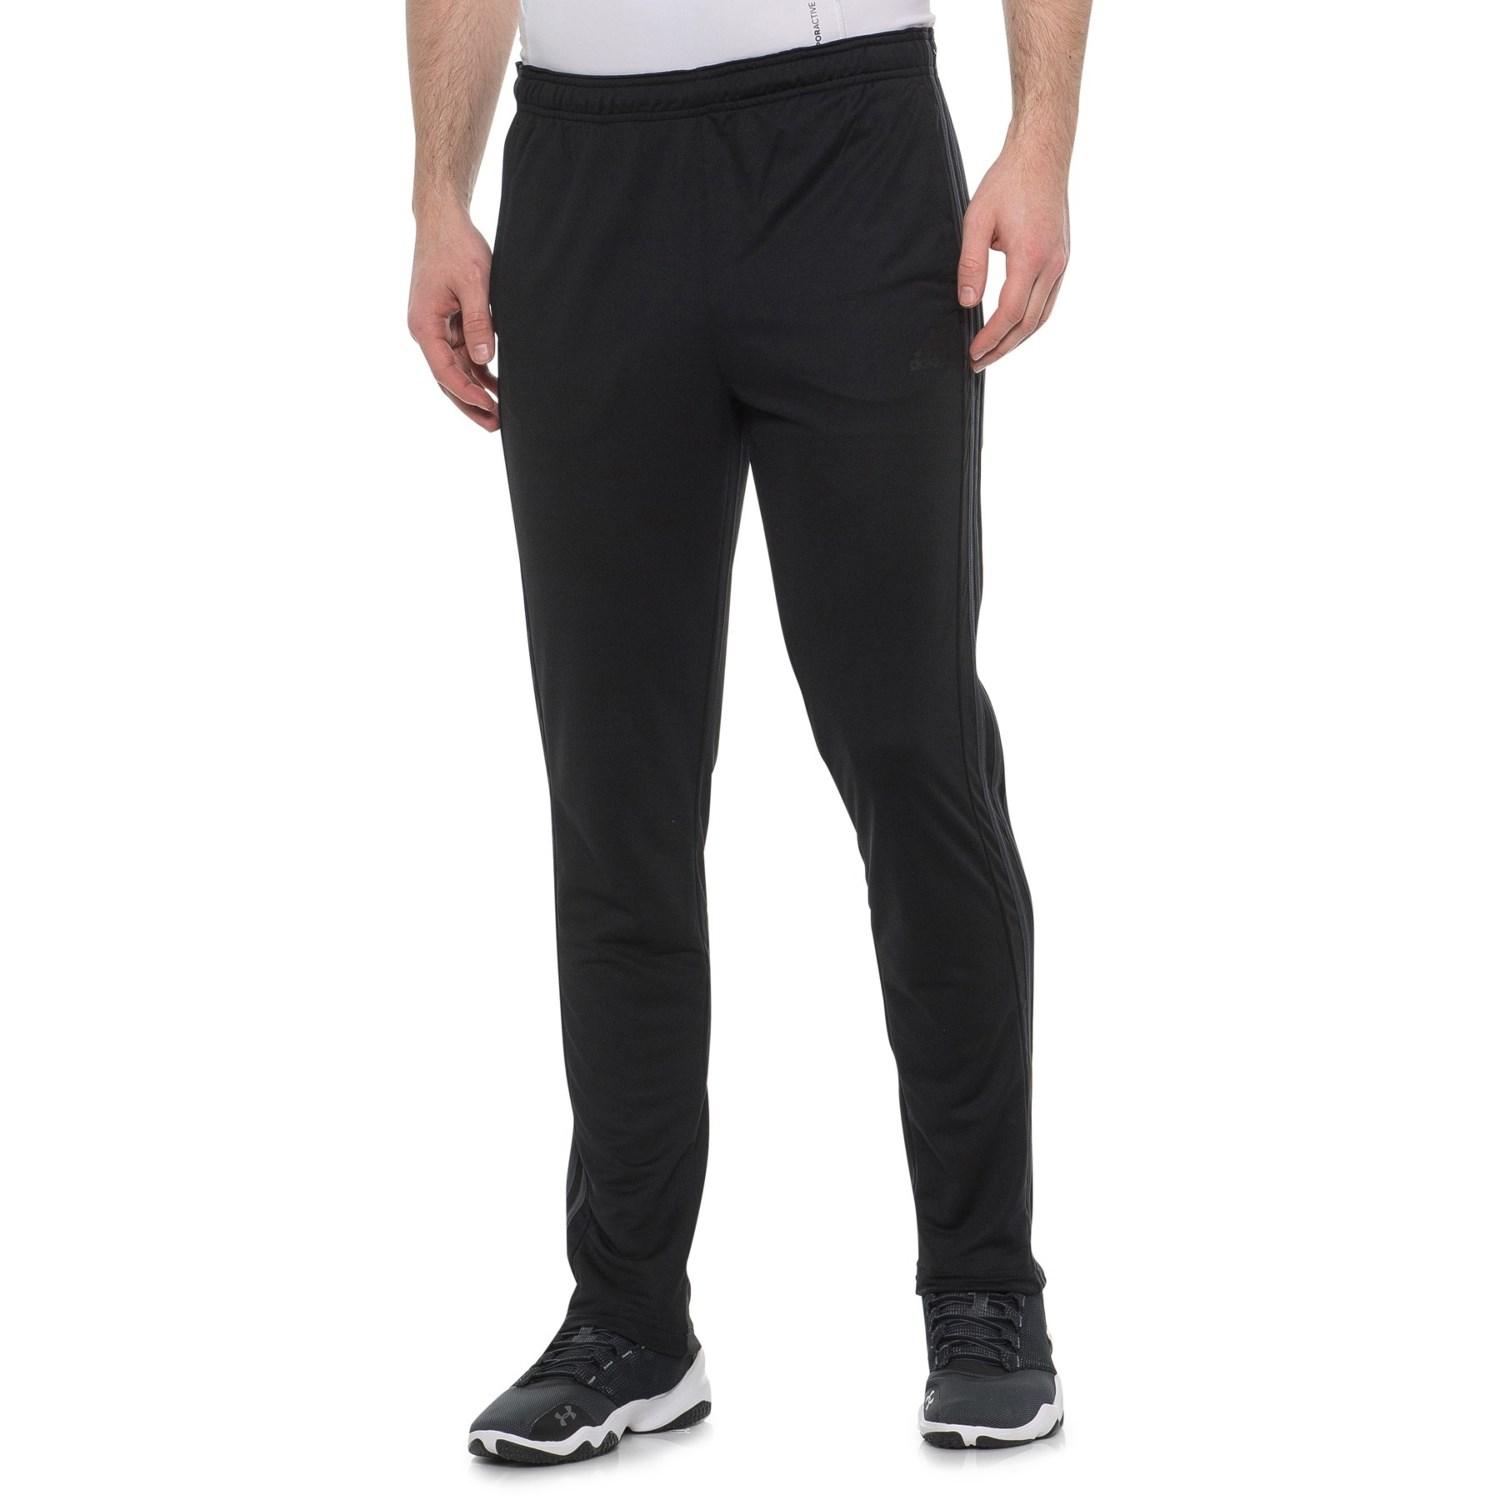 adidas Synthetic Ki Tapered Pants in Black Carbon (Black) for Men - Lyst